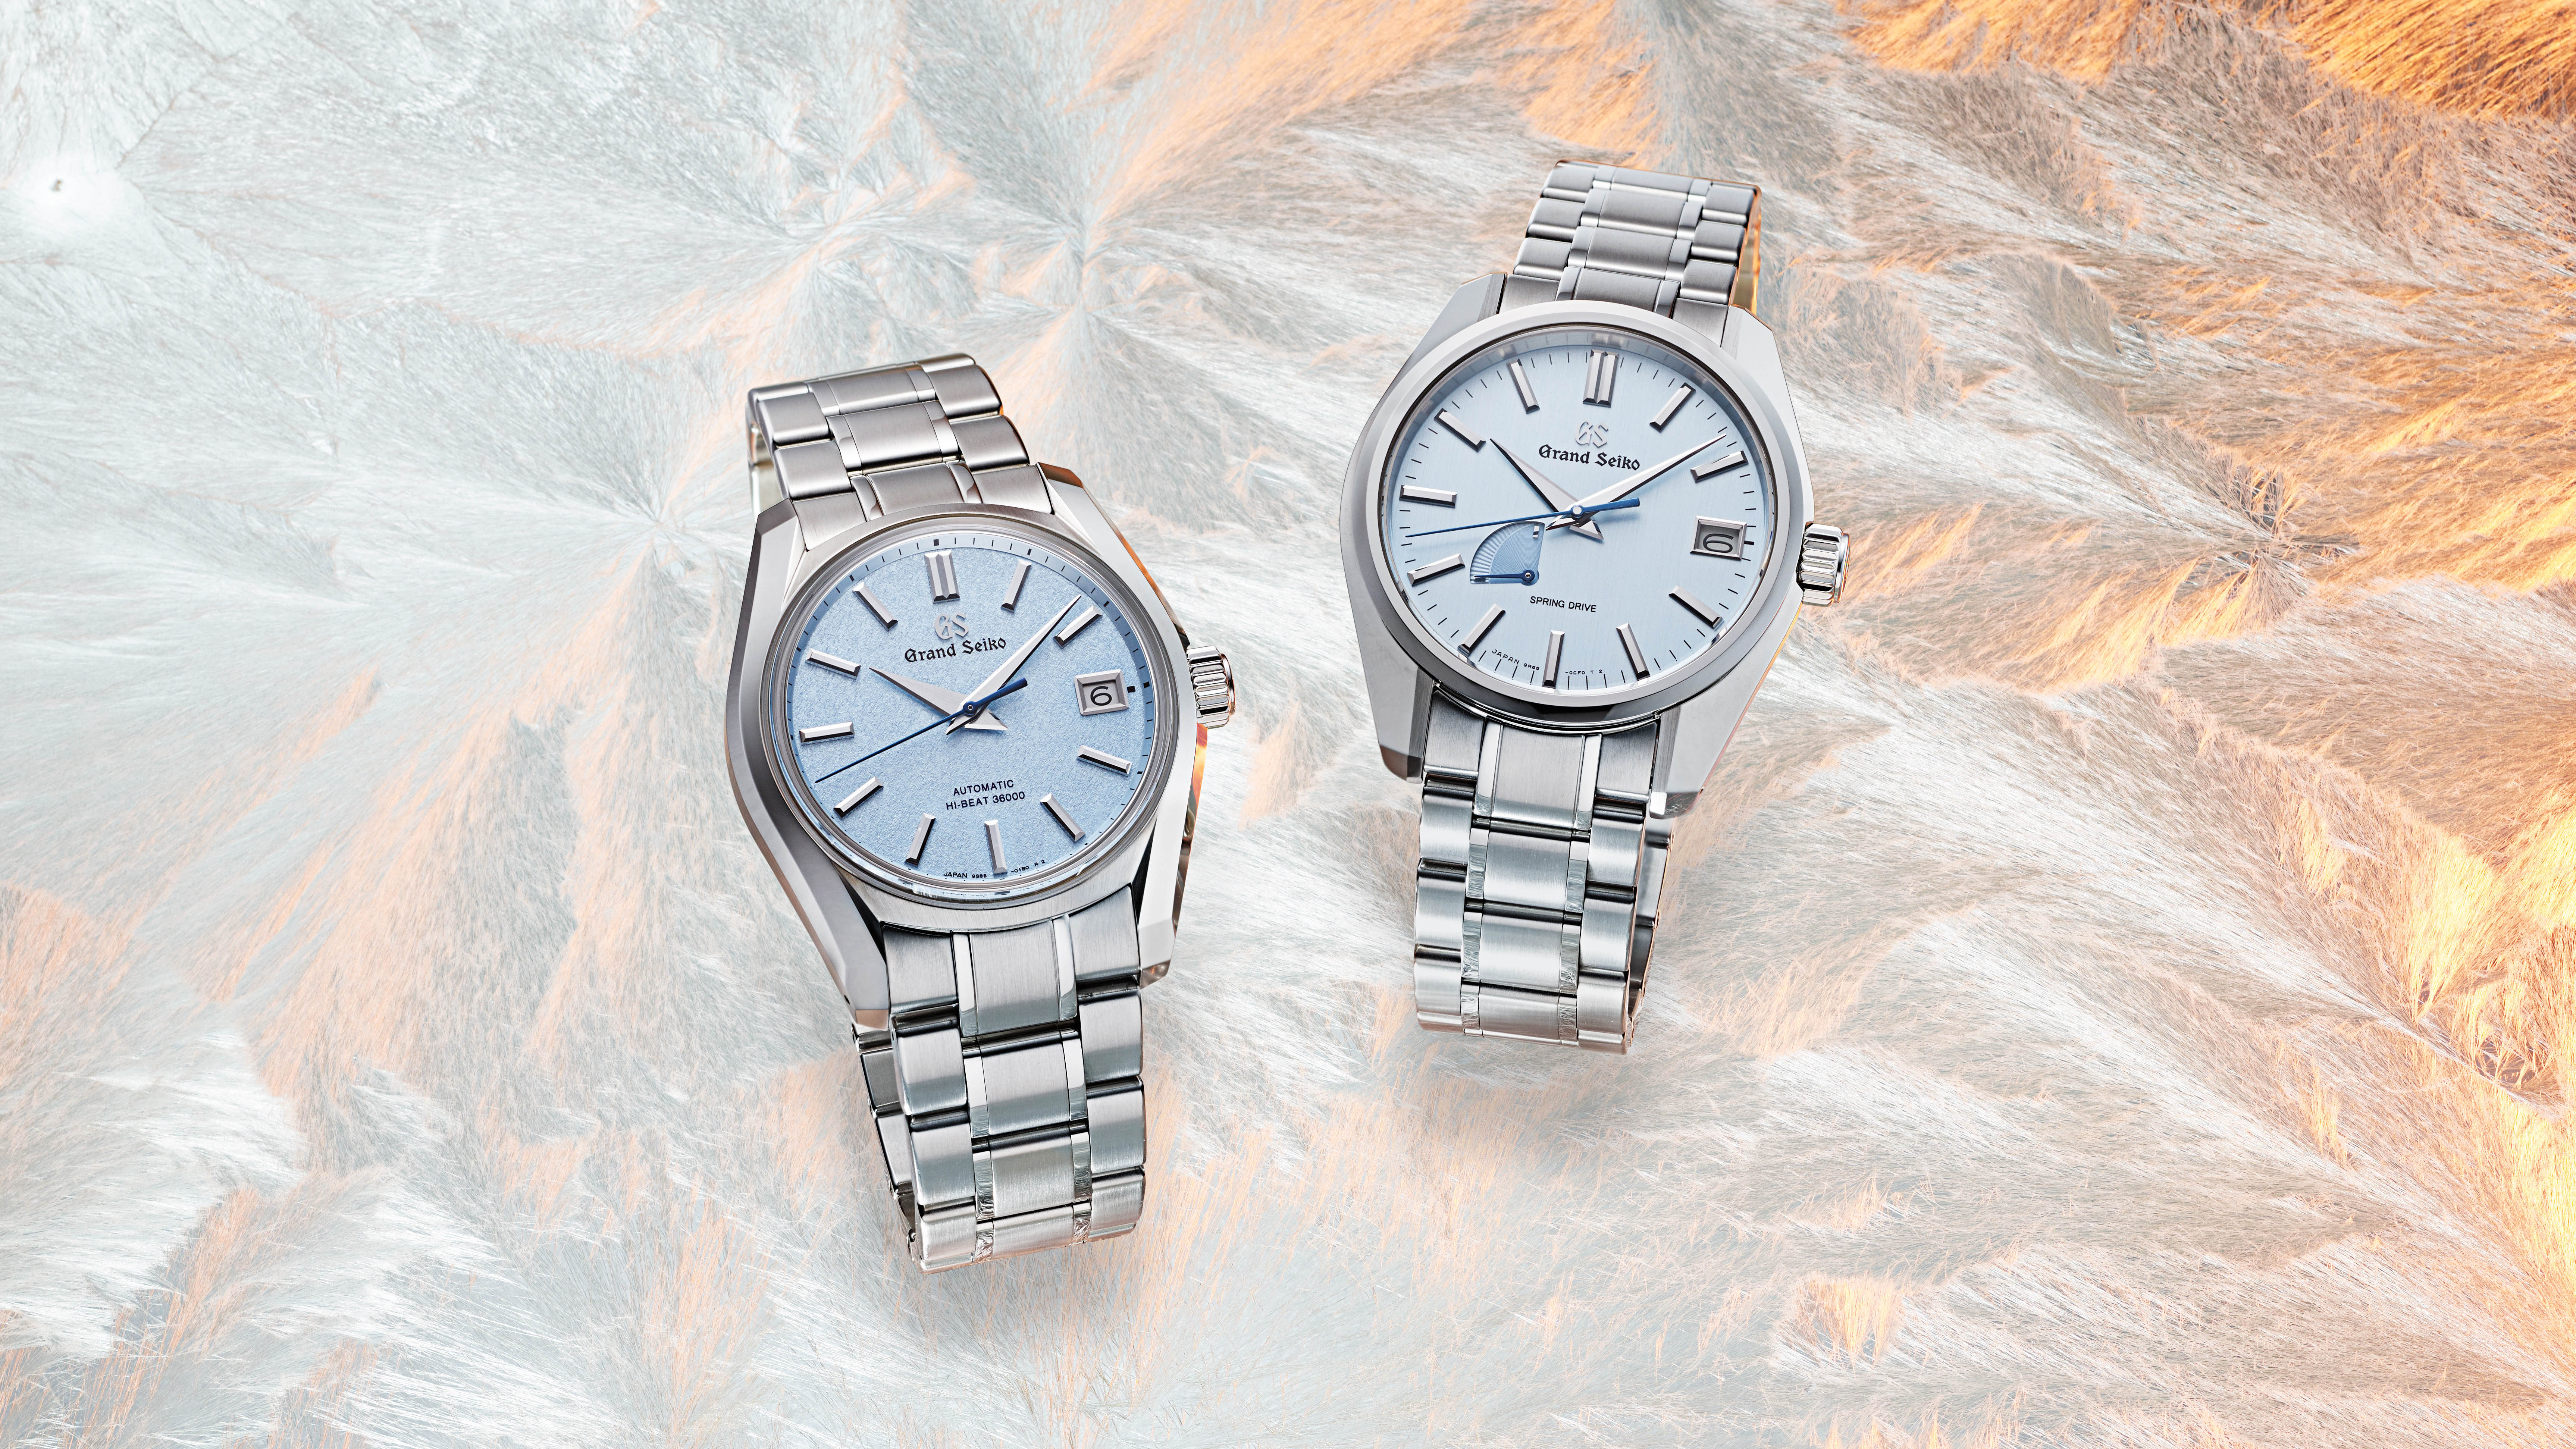 The Grand Seiko Soko Frost U.S. Special Editions